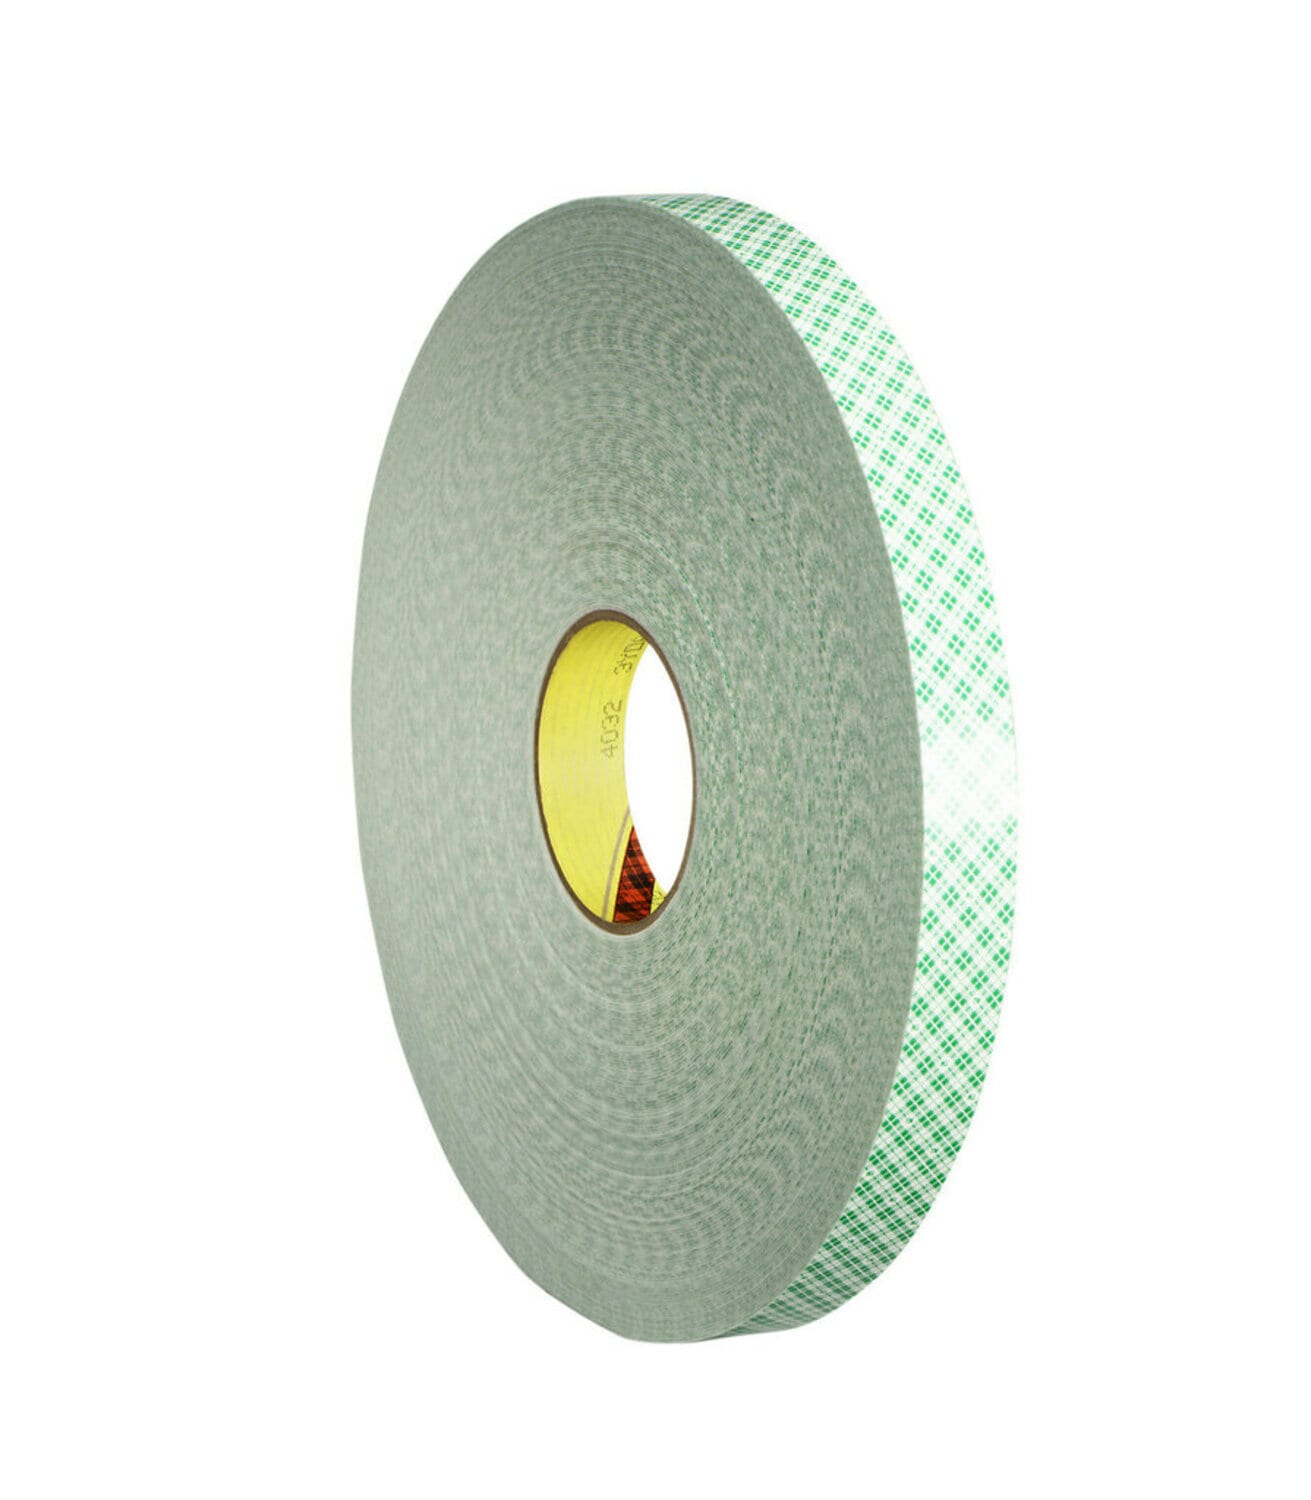 7010373669 - 3M Double Coated Urethane Foam Tape 4032, Off White, 12 in x 72 yd, 31
mil, 1 Roll/Case